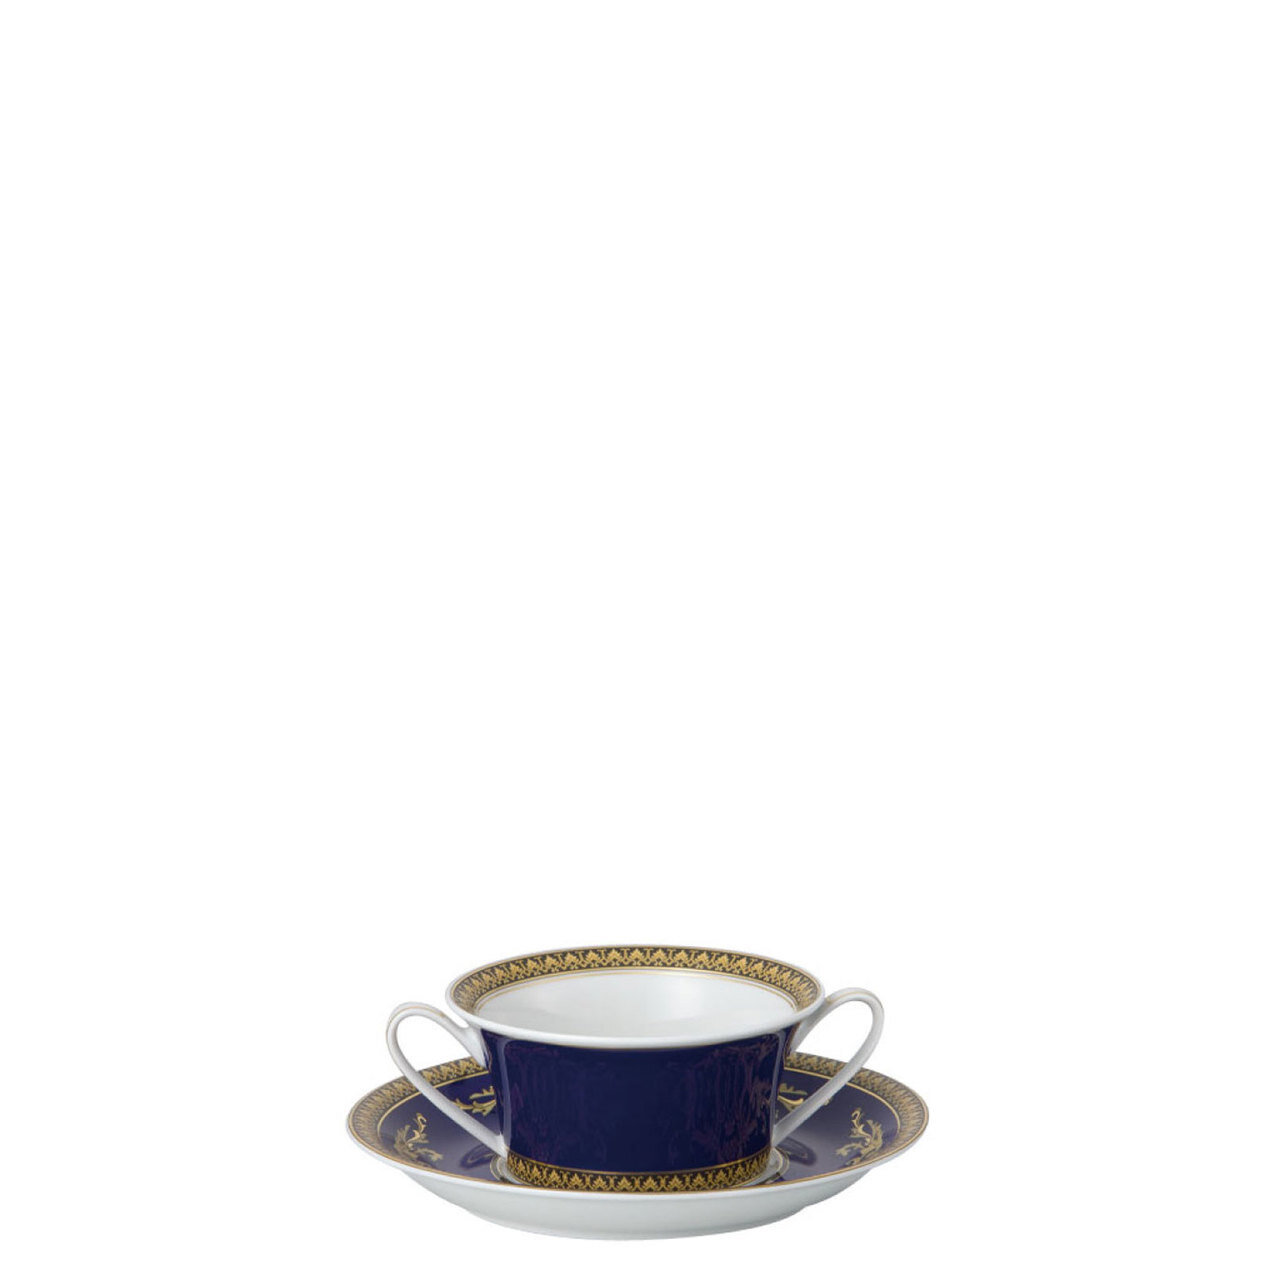 Versace Medusa Blue Cream Soup Cup and Saucer 6 3/4 Inch 10 oz.